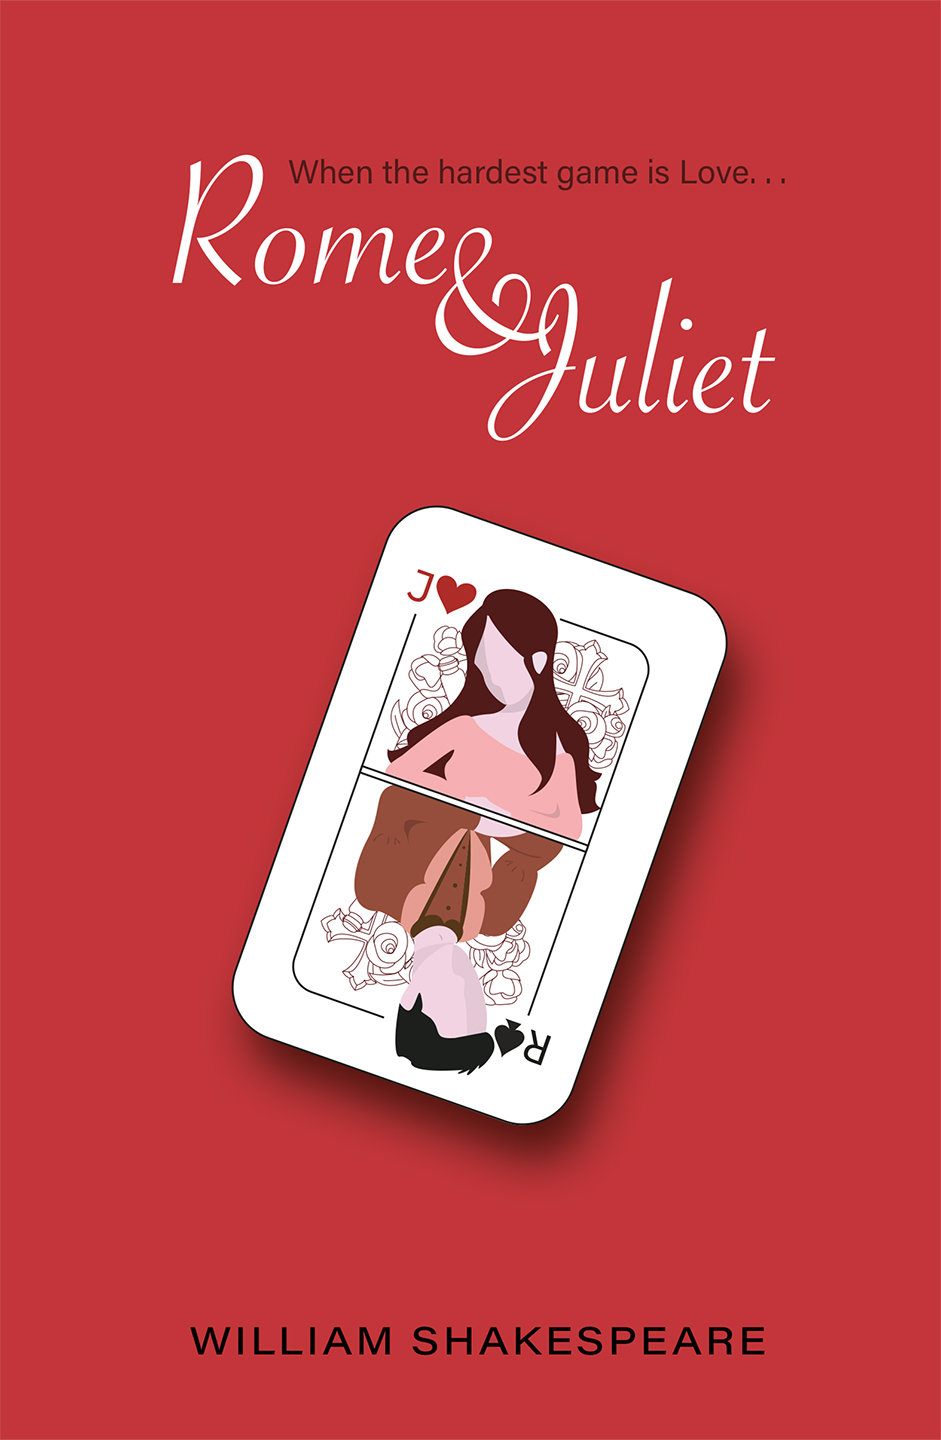 Romeo and Juliet inside a card